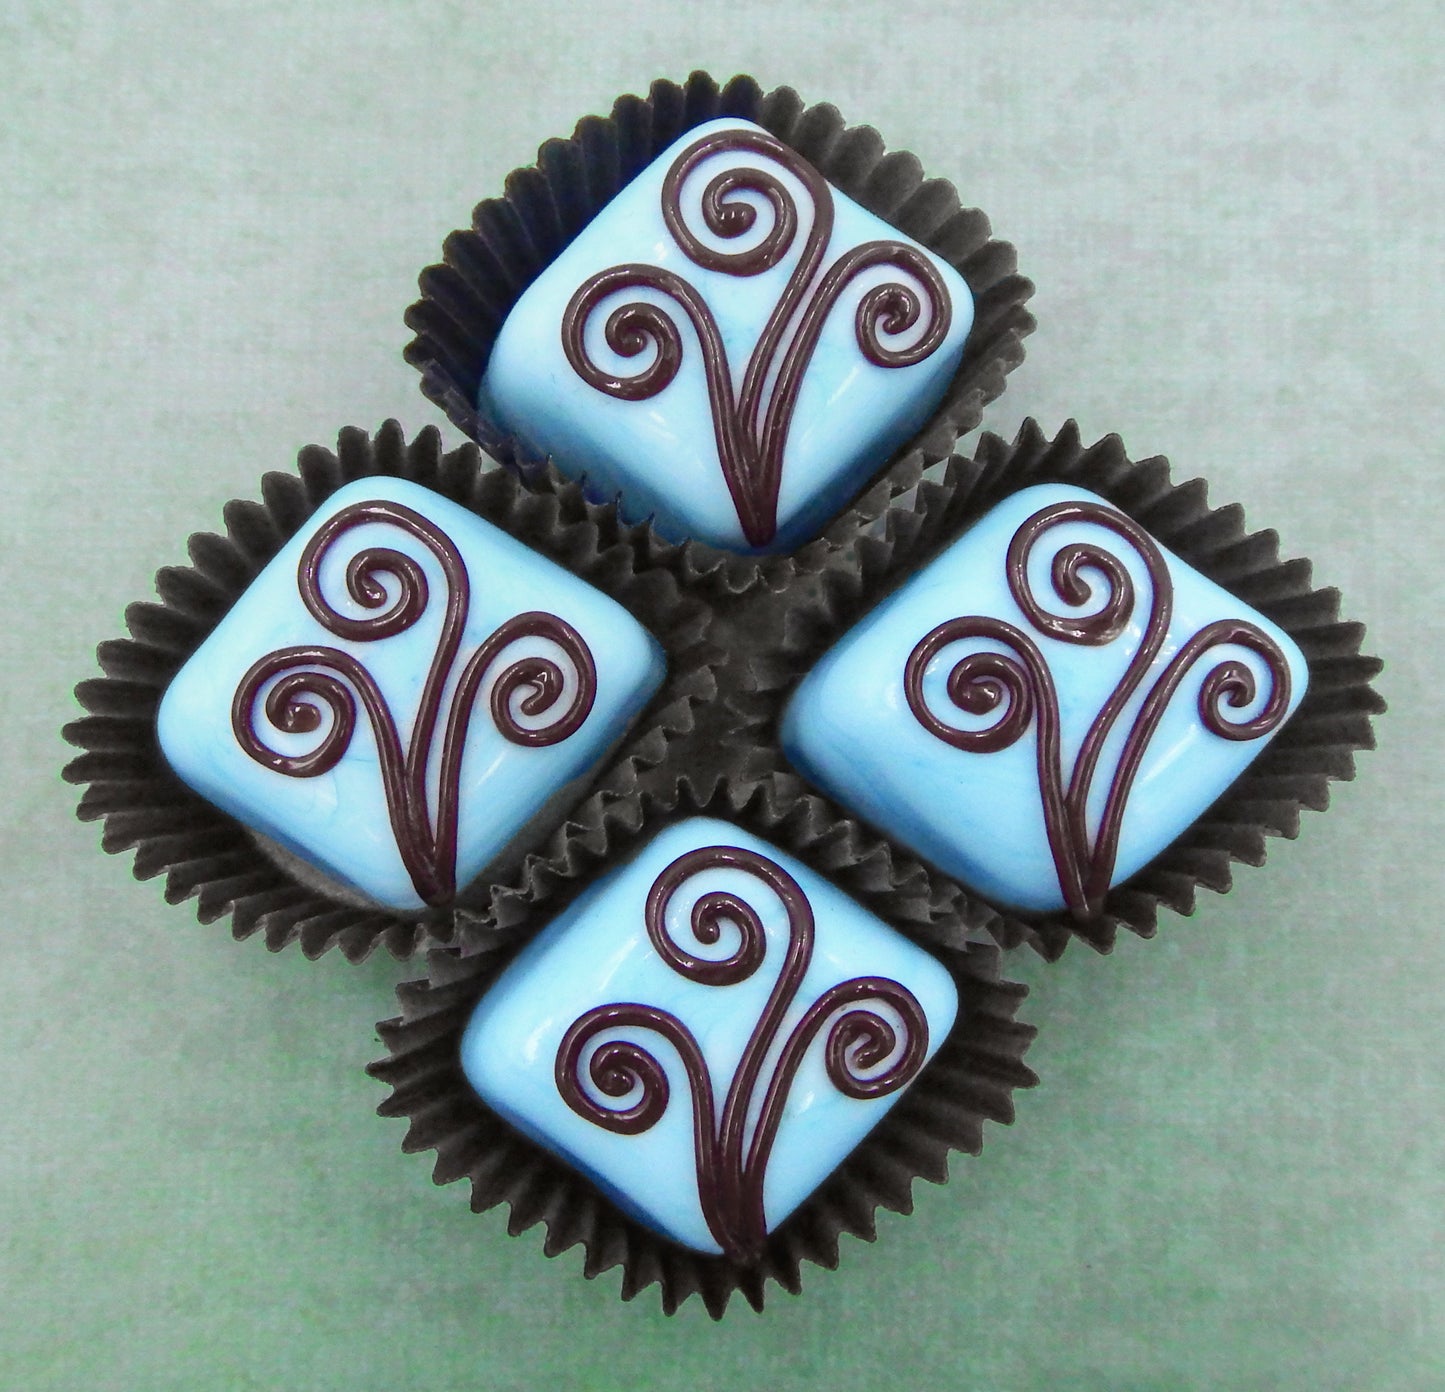 Chocolate Treats with Curls (16-105+)